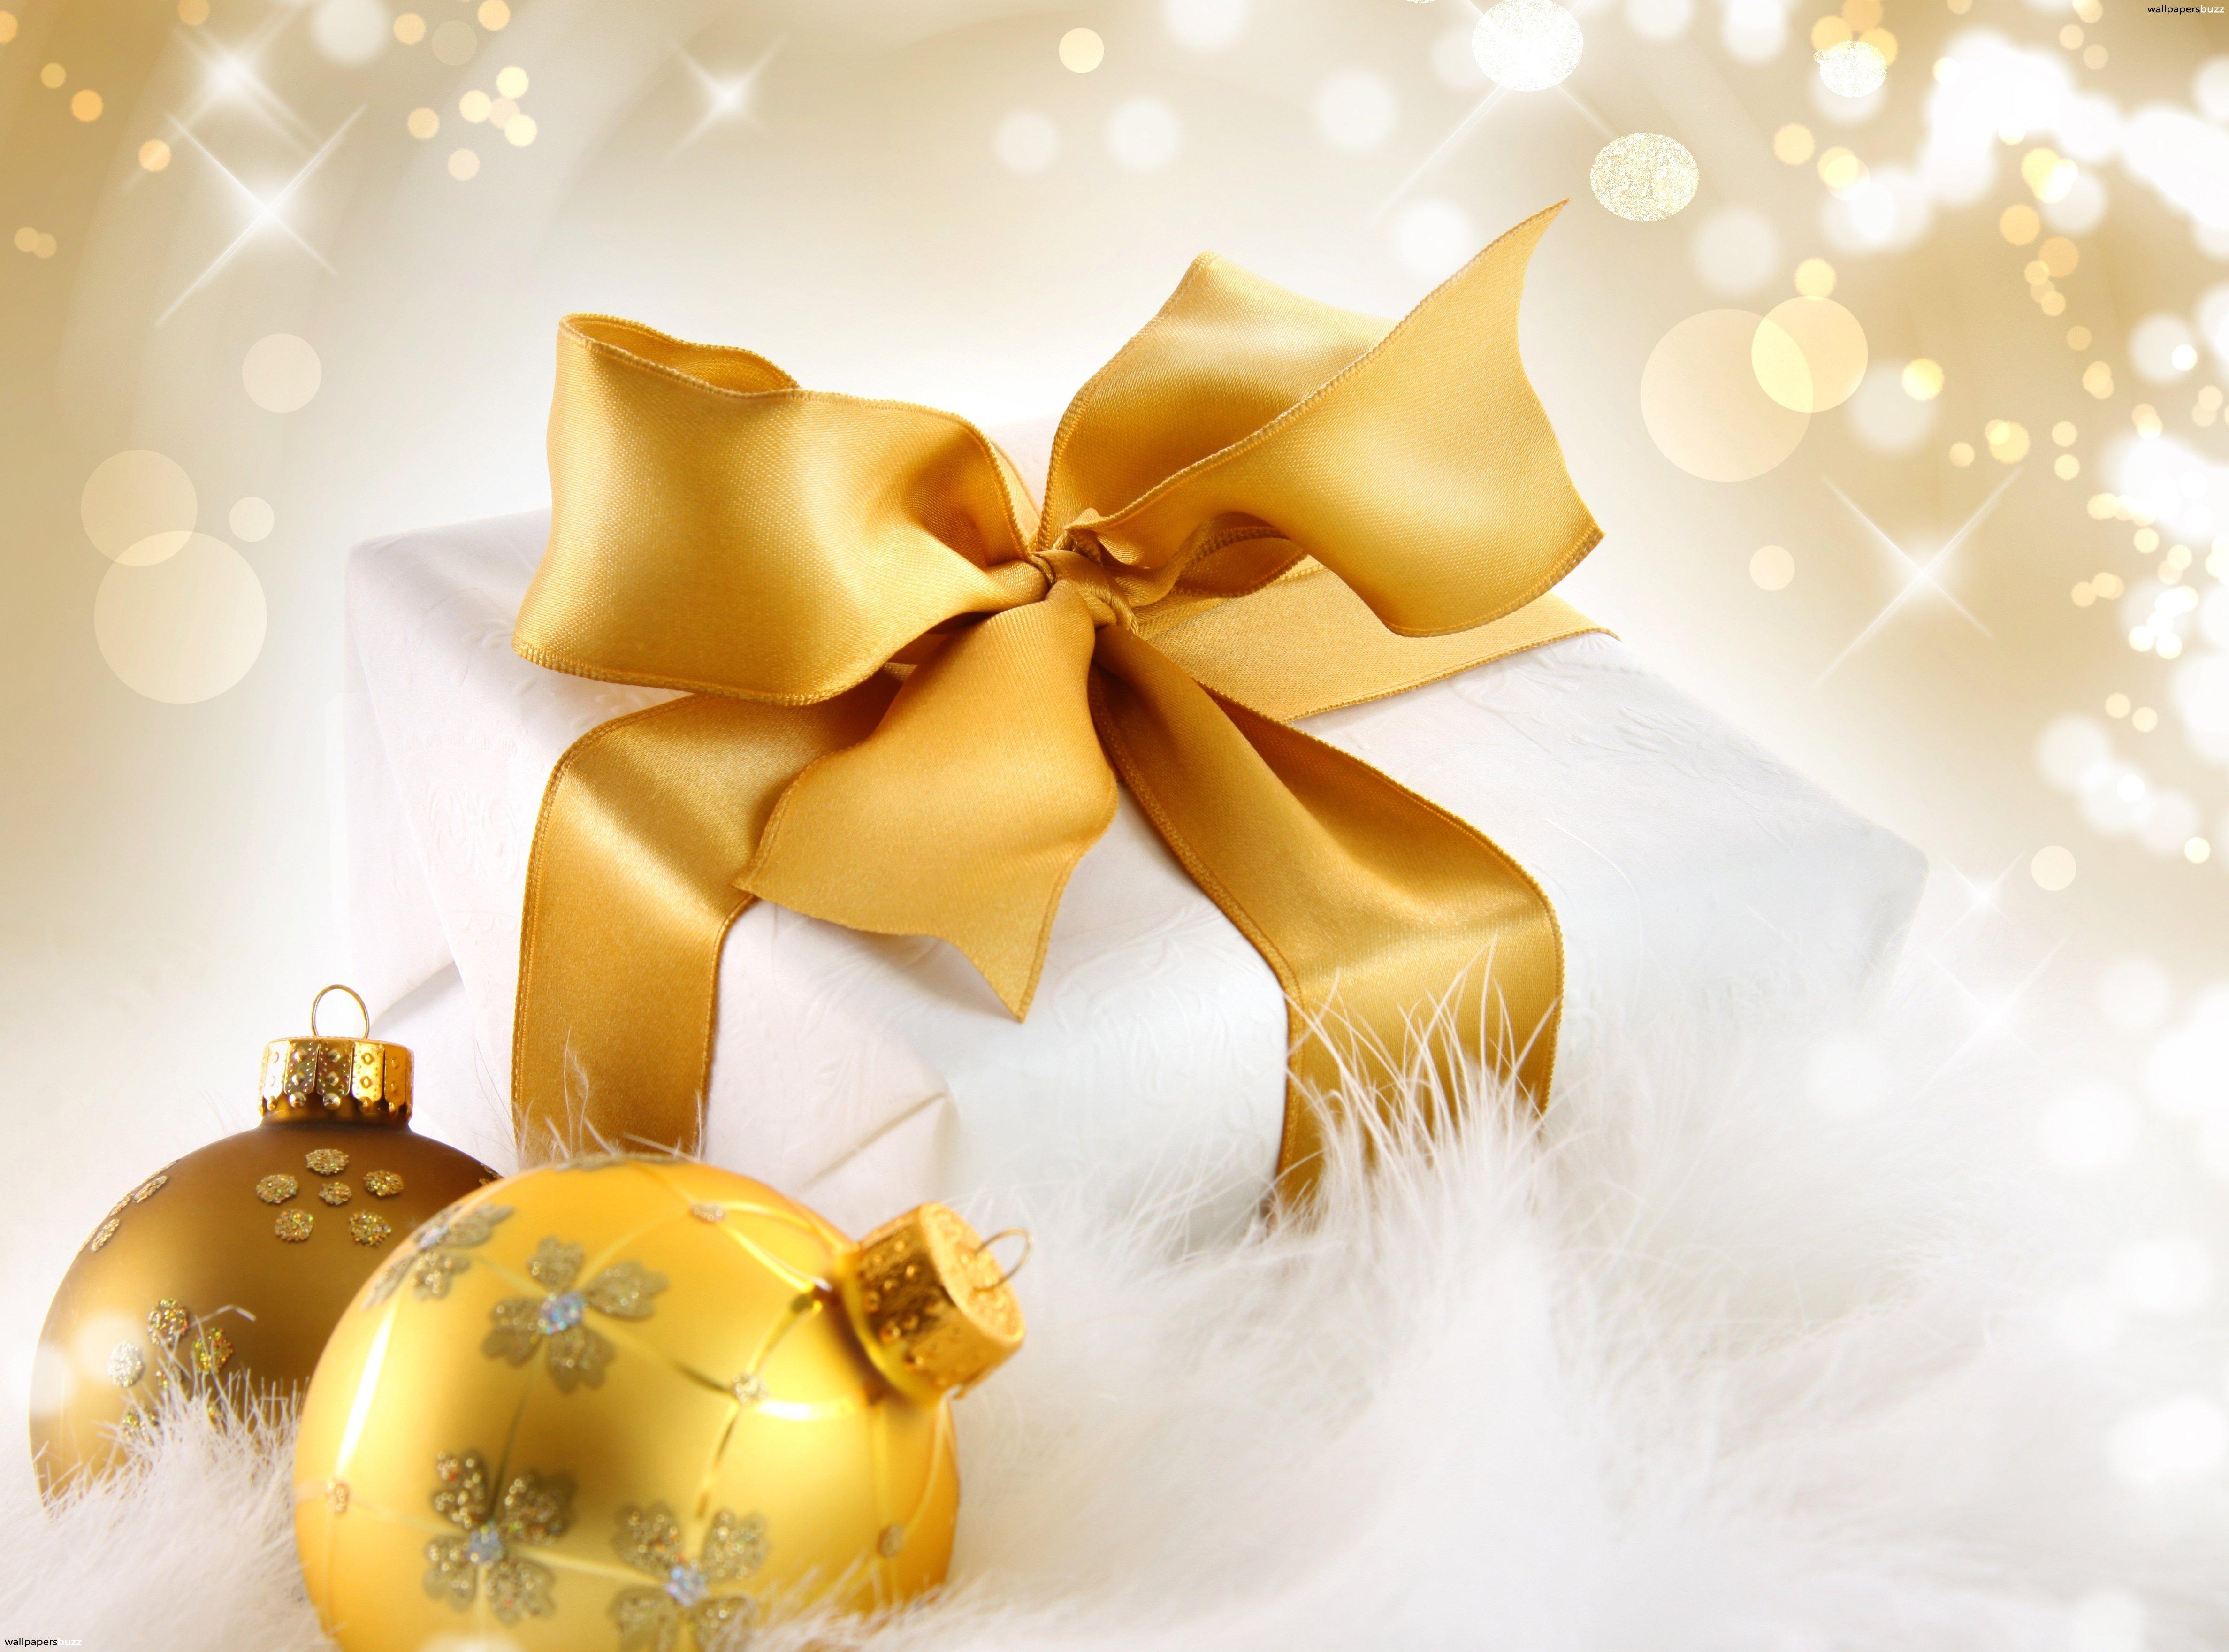 Gold Christmas Backgrounds